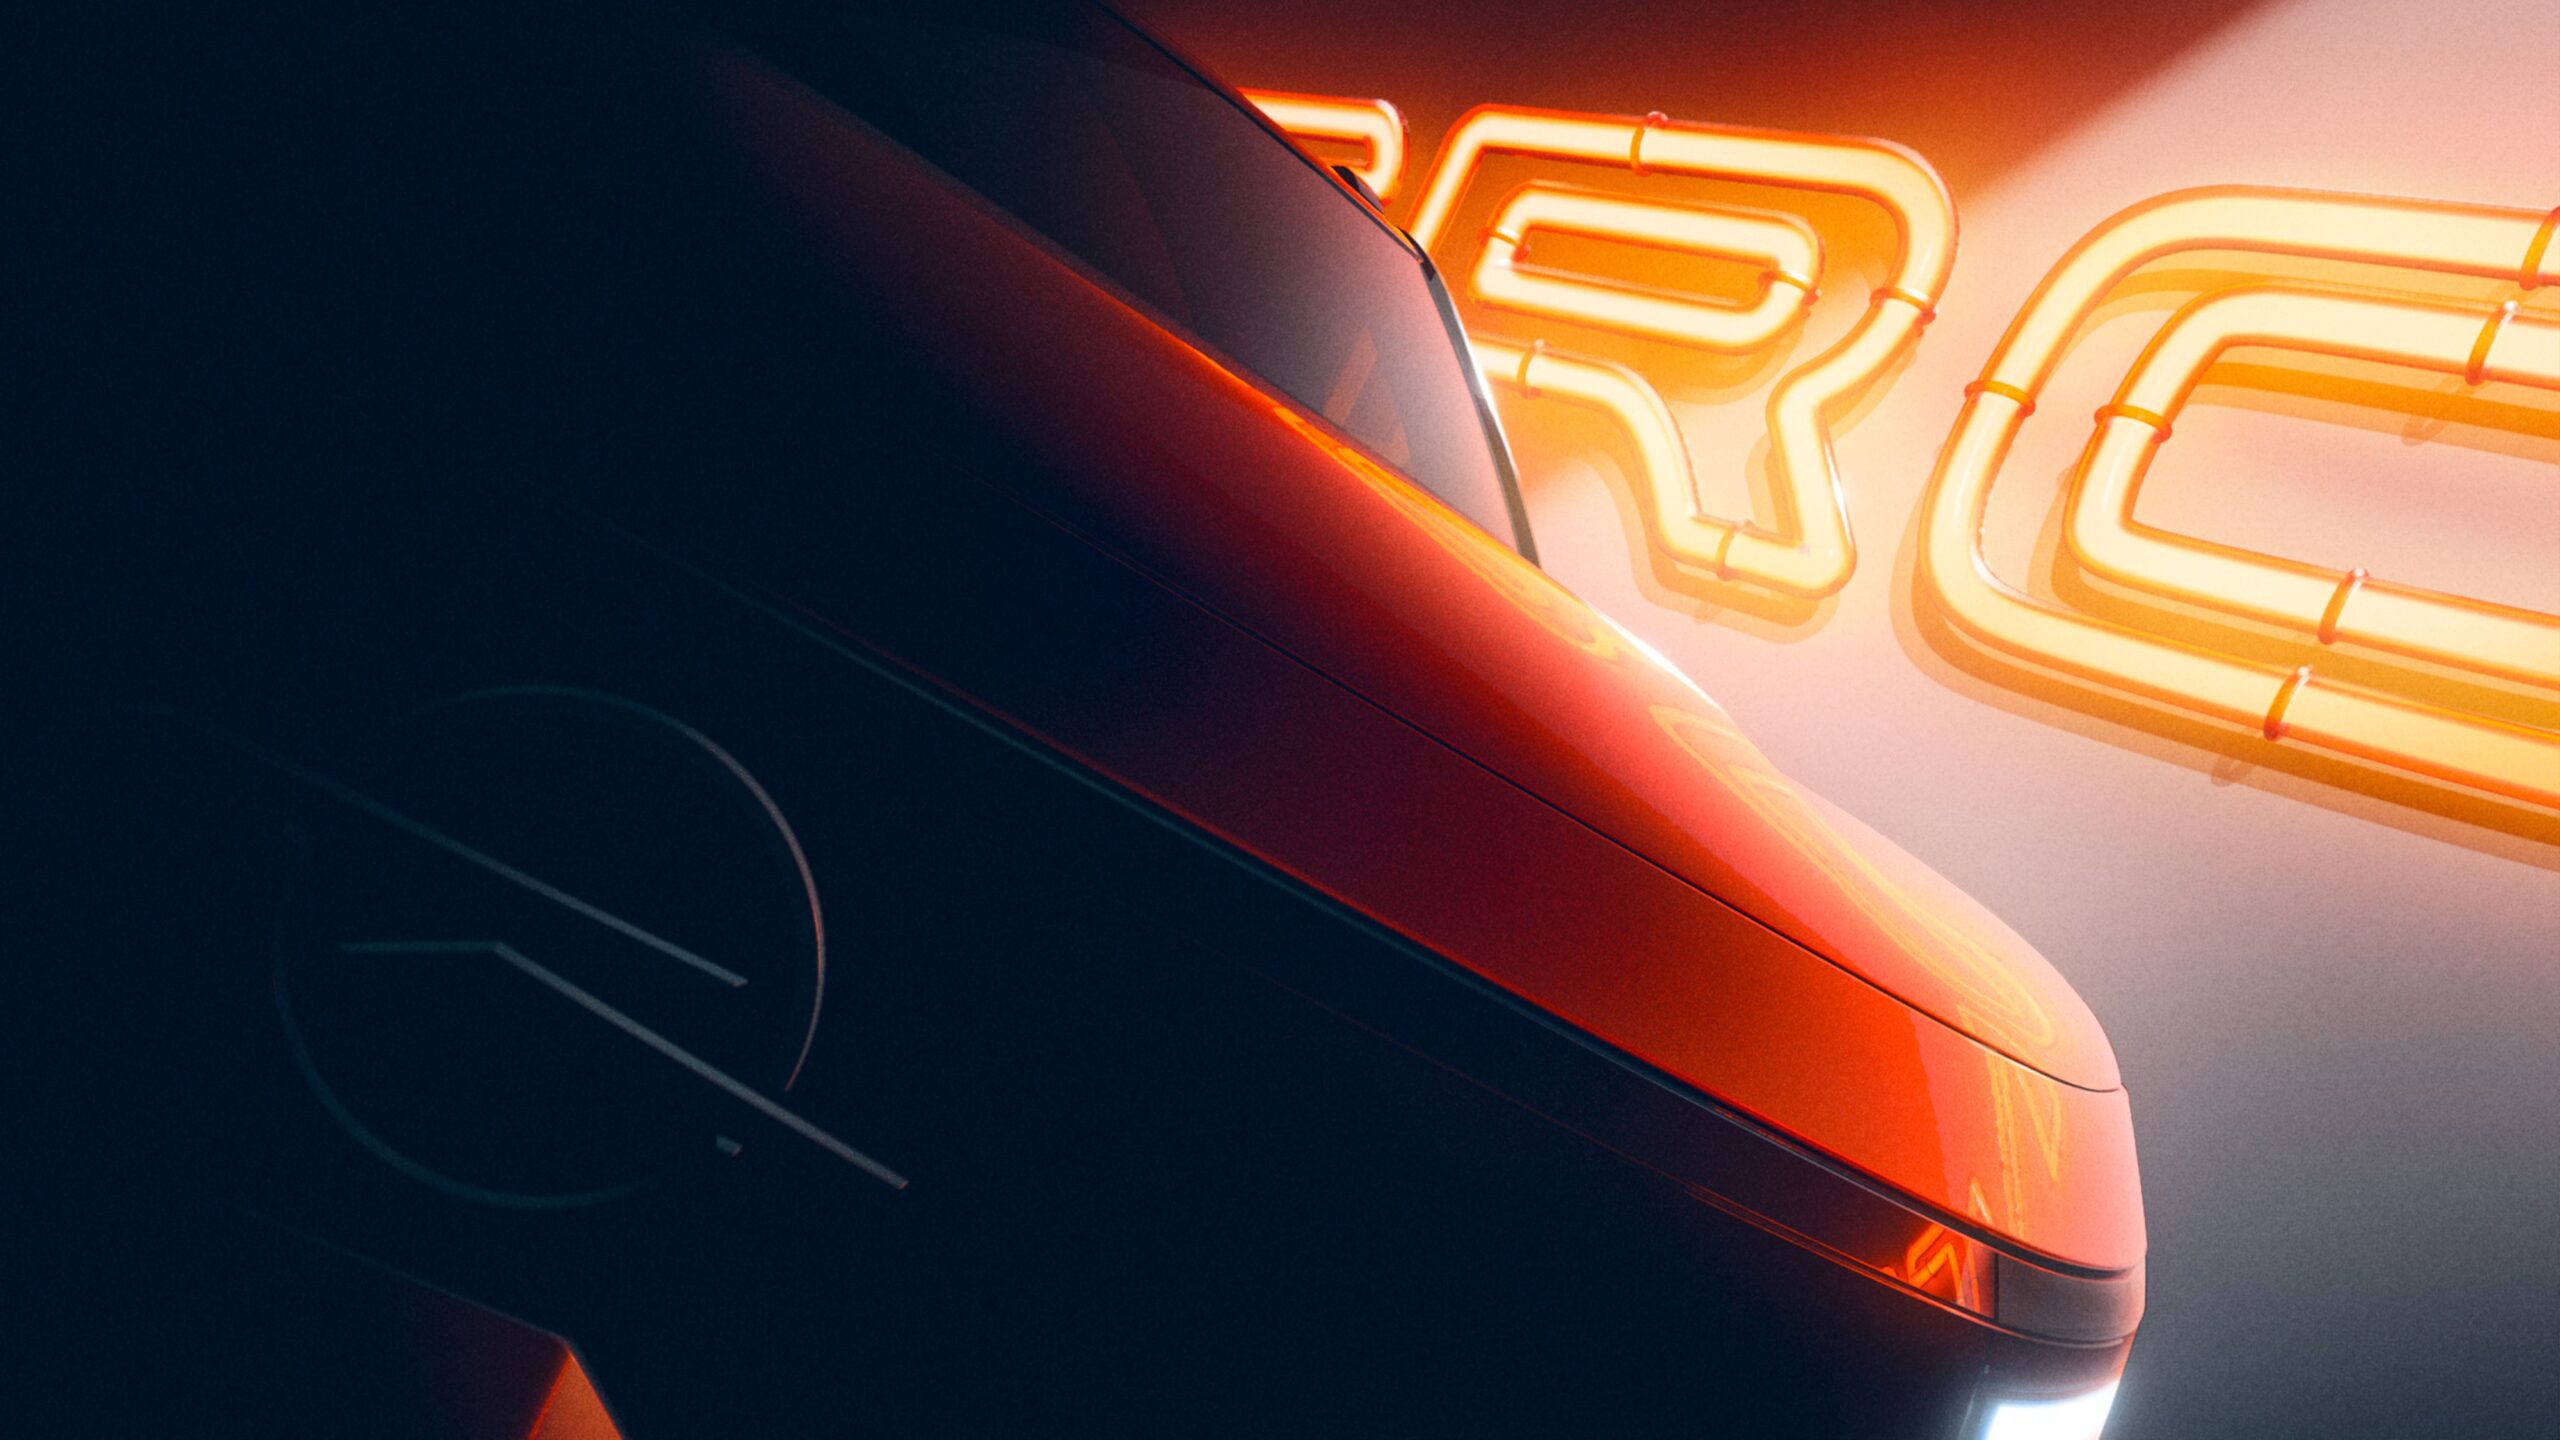 A teaser image of the new Opel Frontera featuring the revamped Blitz logo.